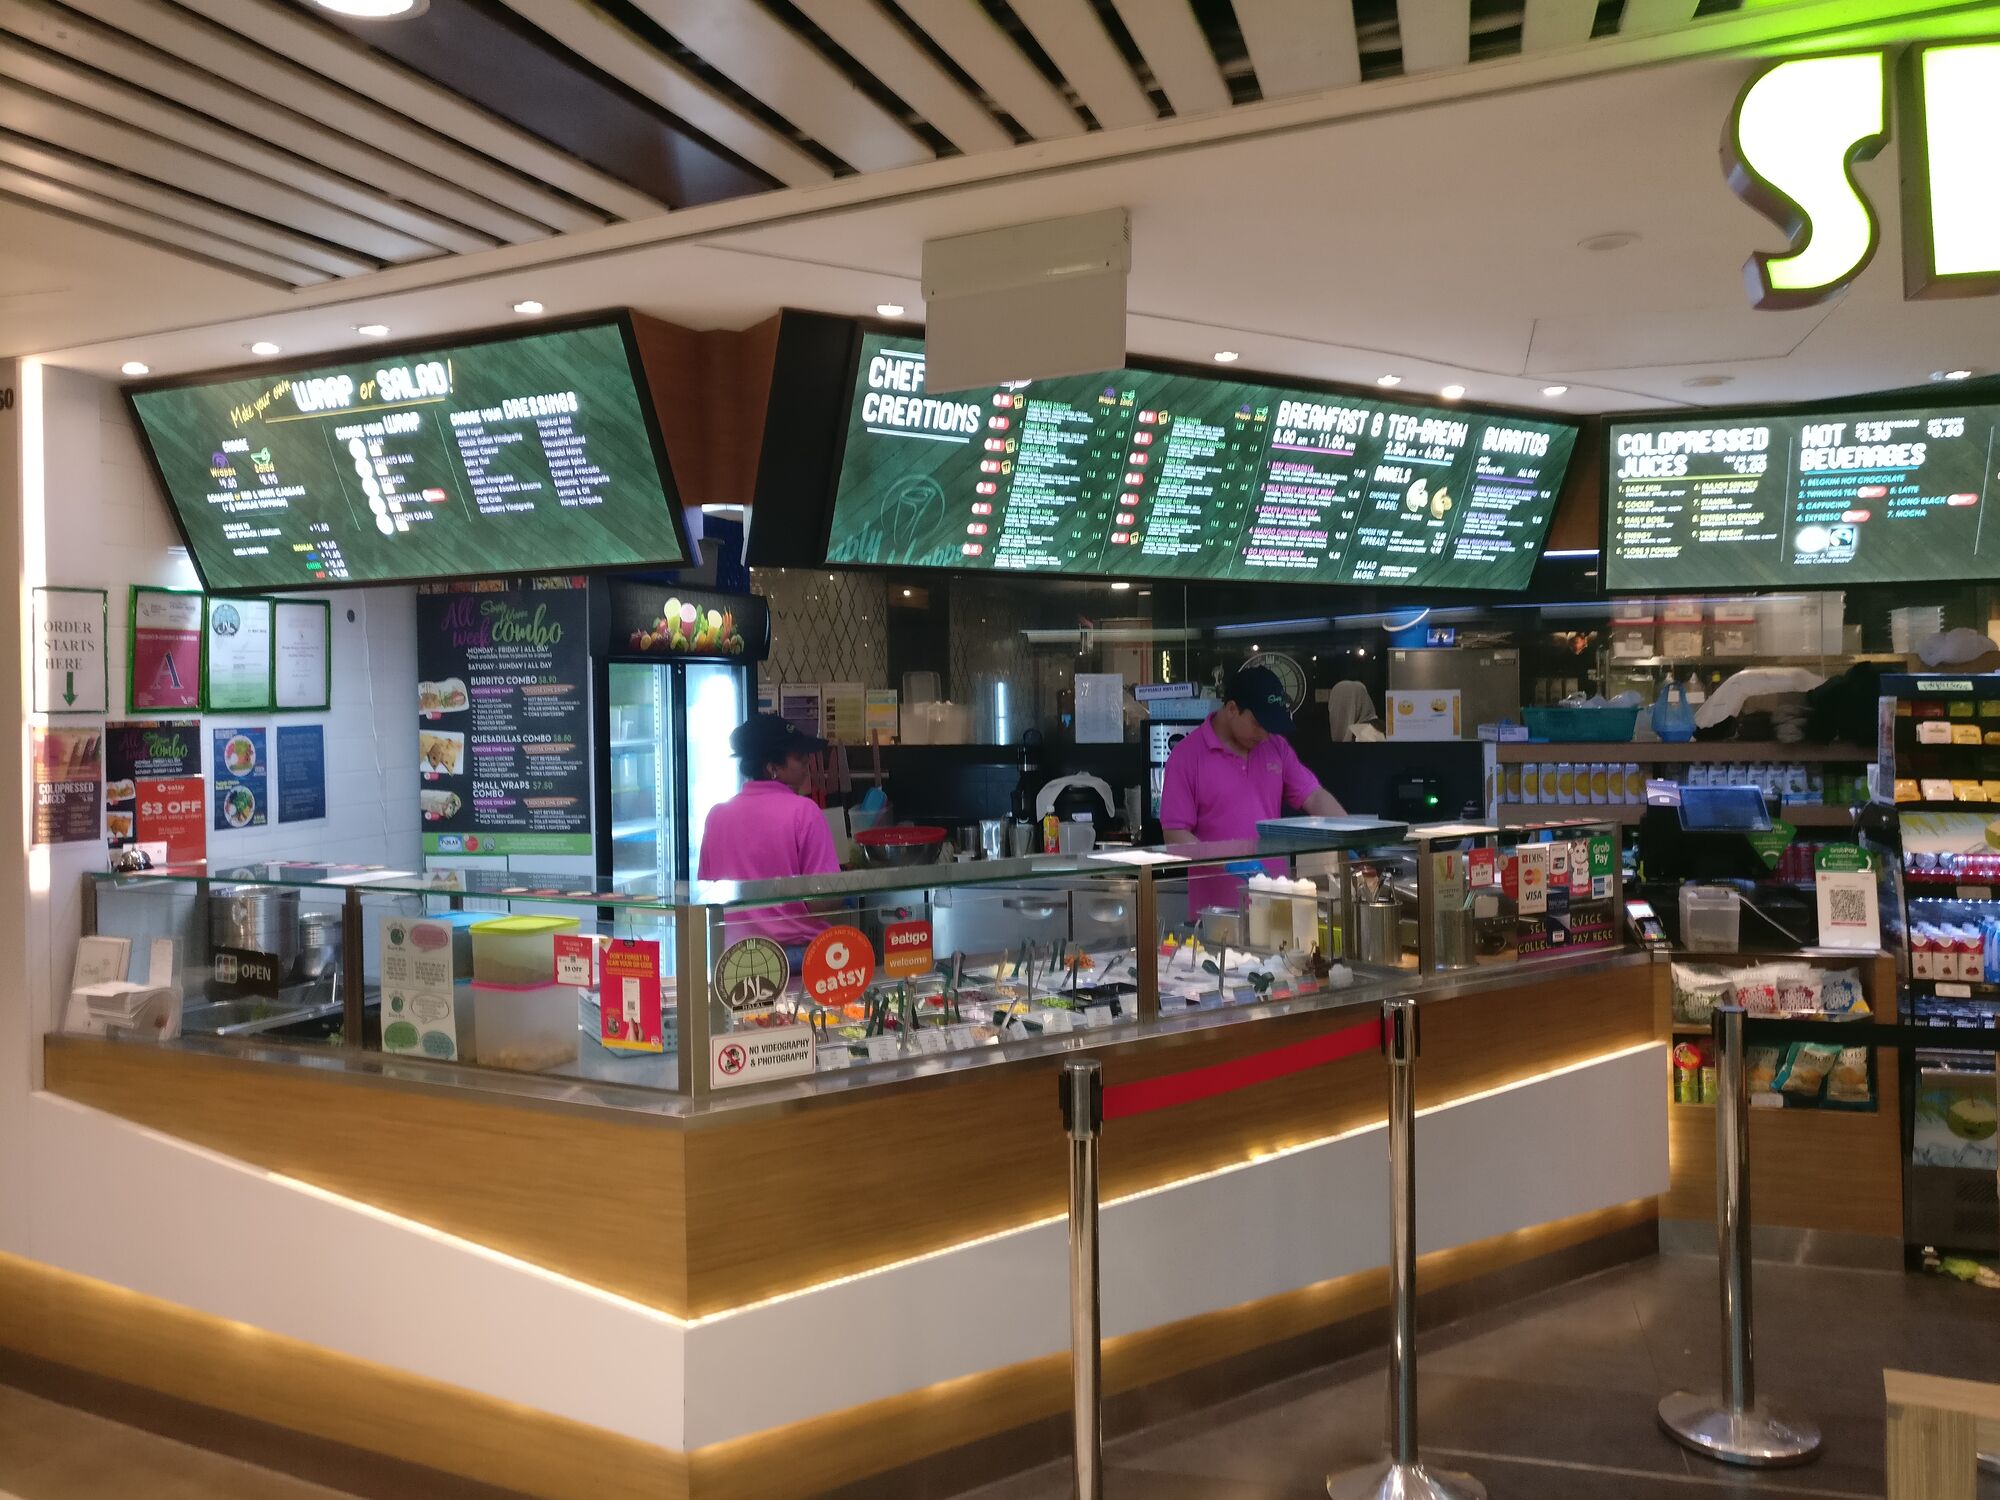 Simply Wrapps Restaurant situated inside the Raffles City shopping center